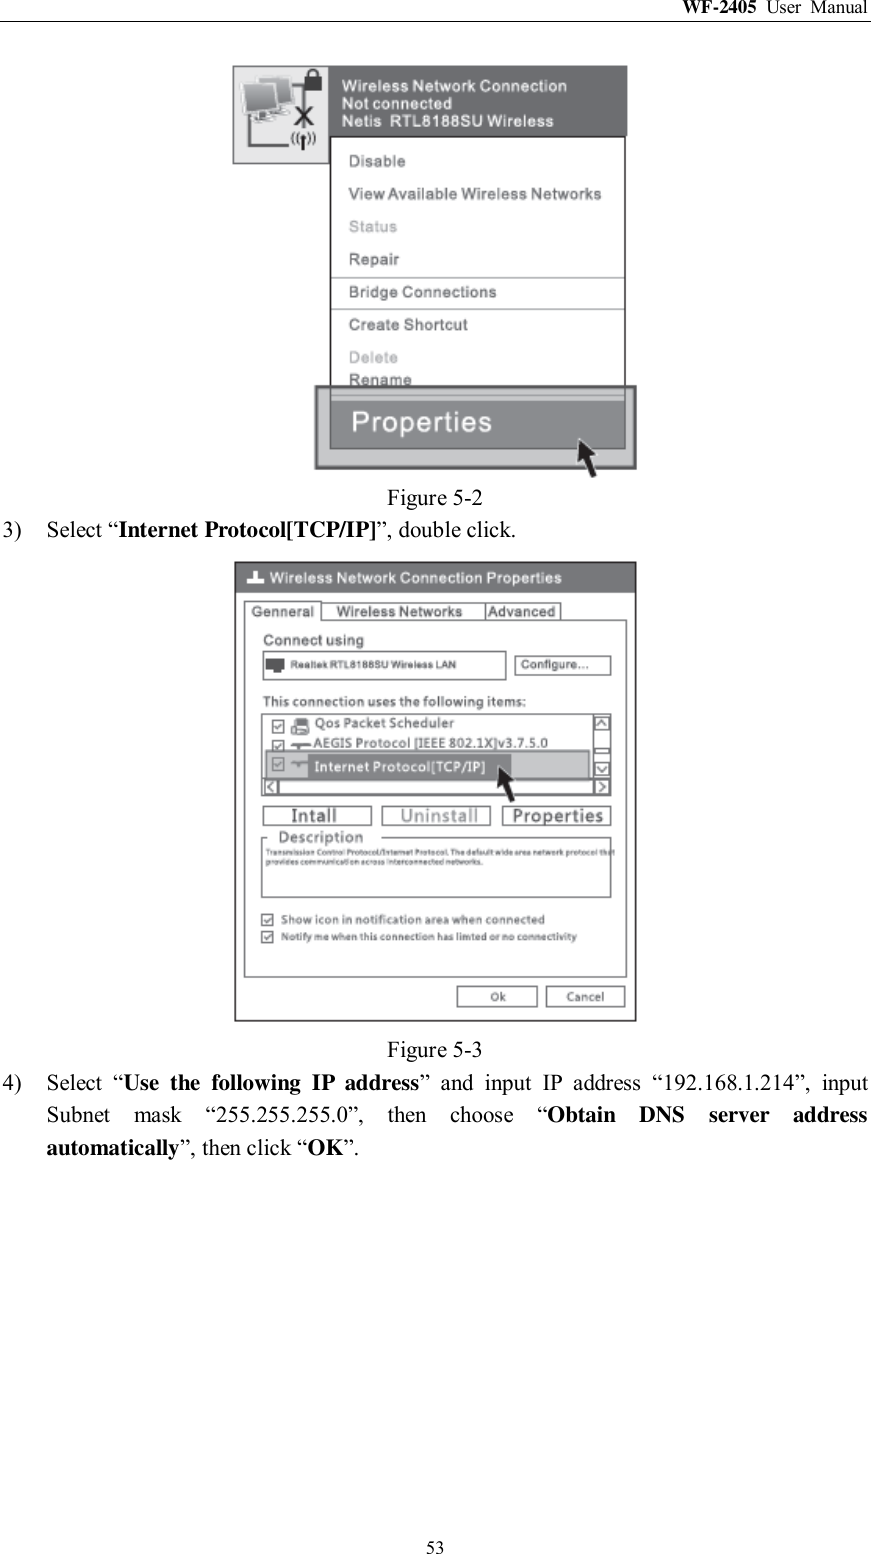 WF-2405  User  Manual  53  Figure 5-2 3) Select “Internet Protocol[TCP/IP]”, double click.  Figure 5-3 4) Select  “Use  the  following  IP  address”  and  input  IP  address  “192.168.1.214”,  input Subnet  mask  “255.255.255.0”,  then  choose  “Obtain  DNS  server  address automatically”, then click “OK”. 